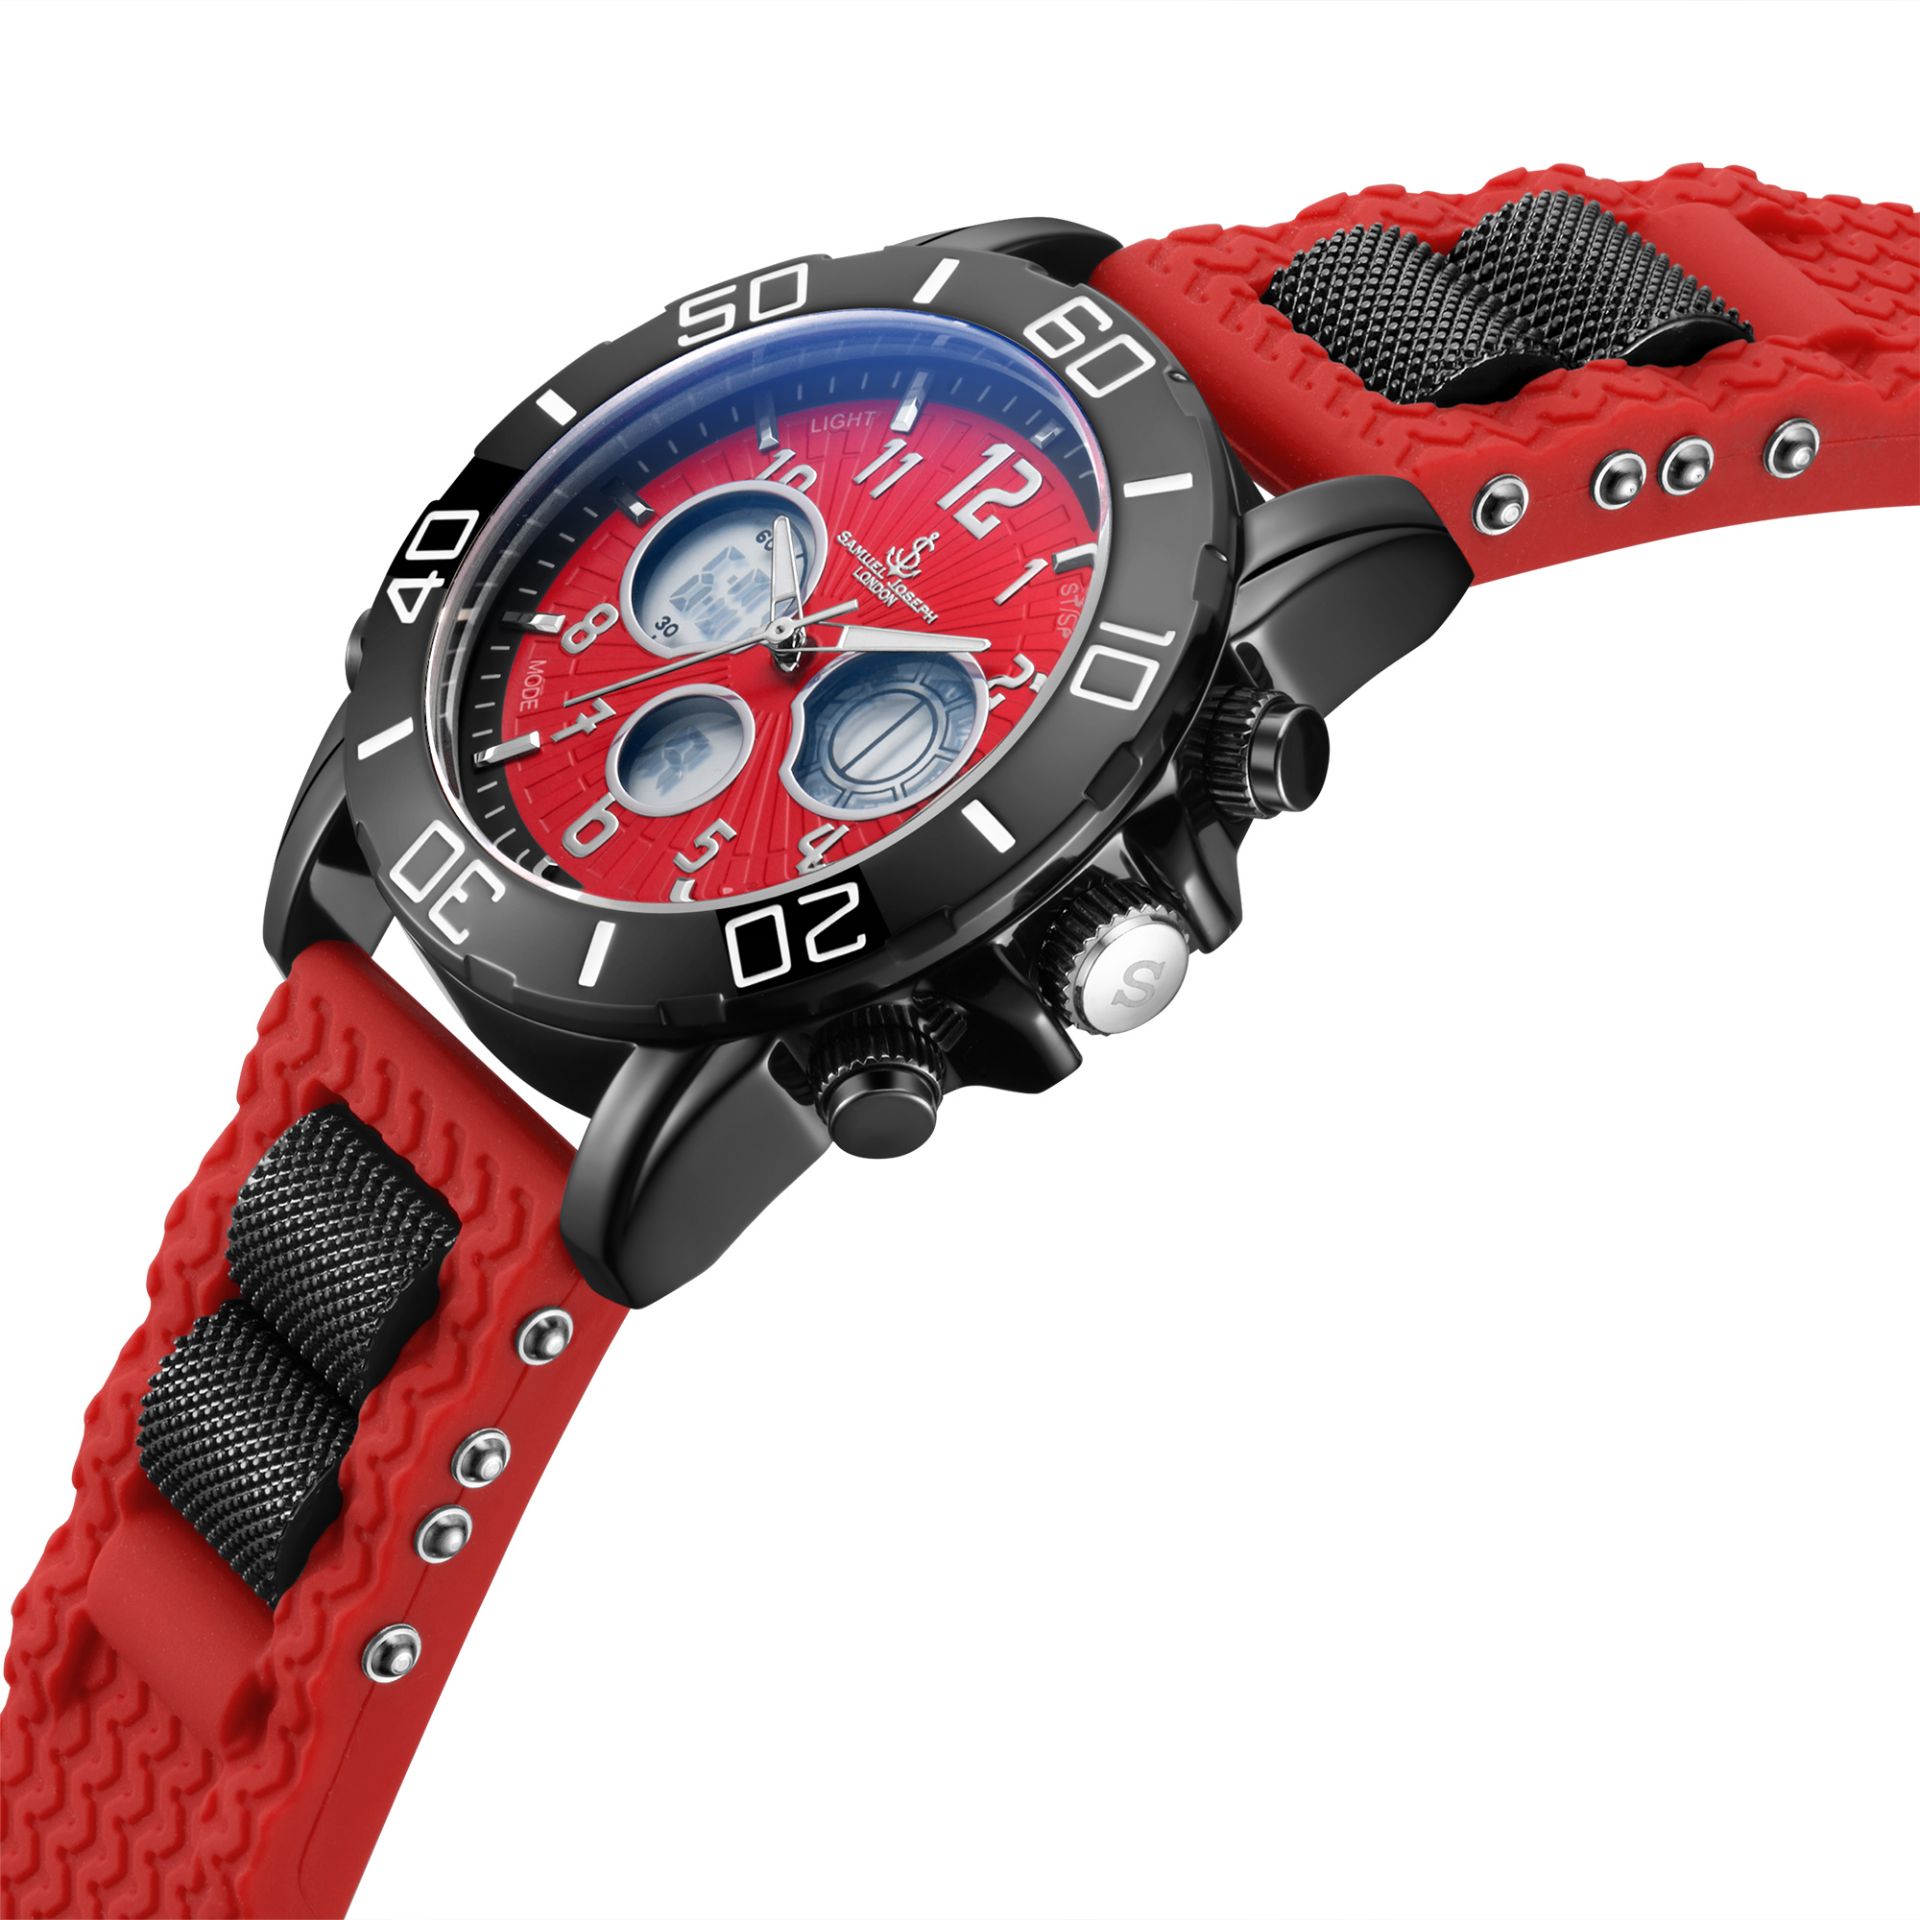 Samuel Joseph Limited Edition Multi Functional Red Mens Watch - Free Delivery & 2 Year Warranty - Image 3 of 5